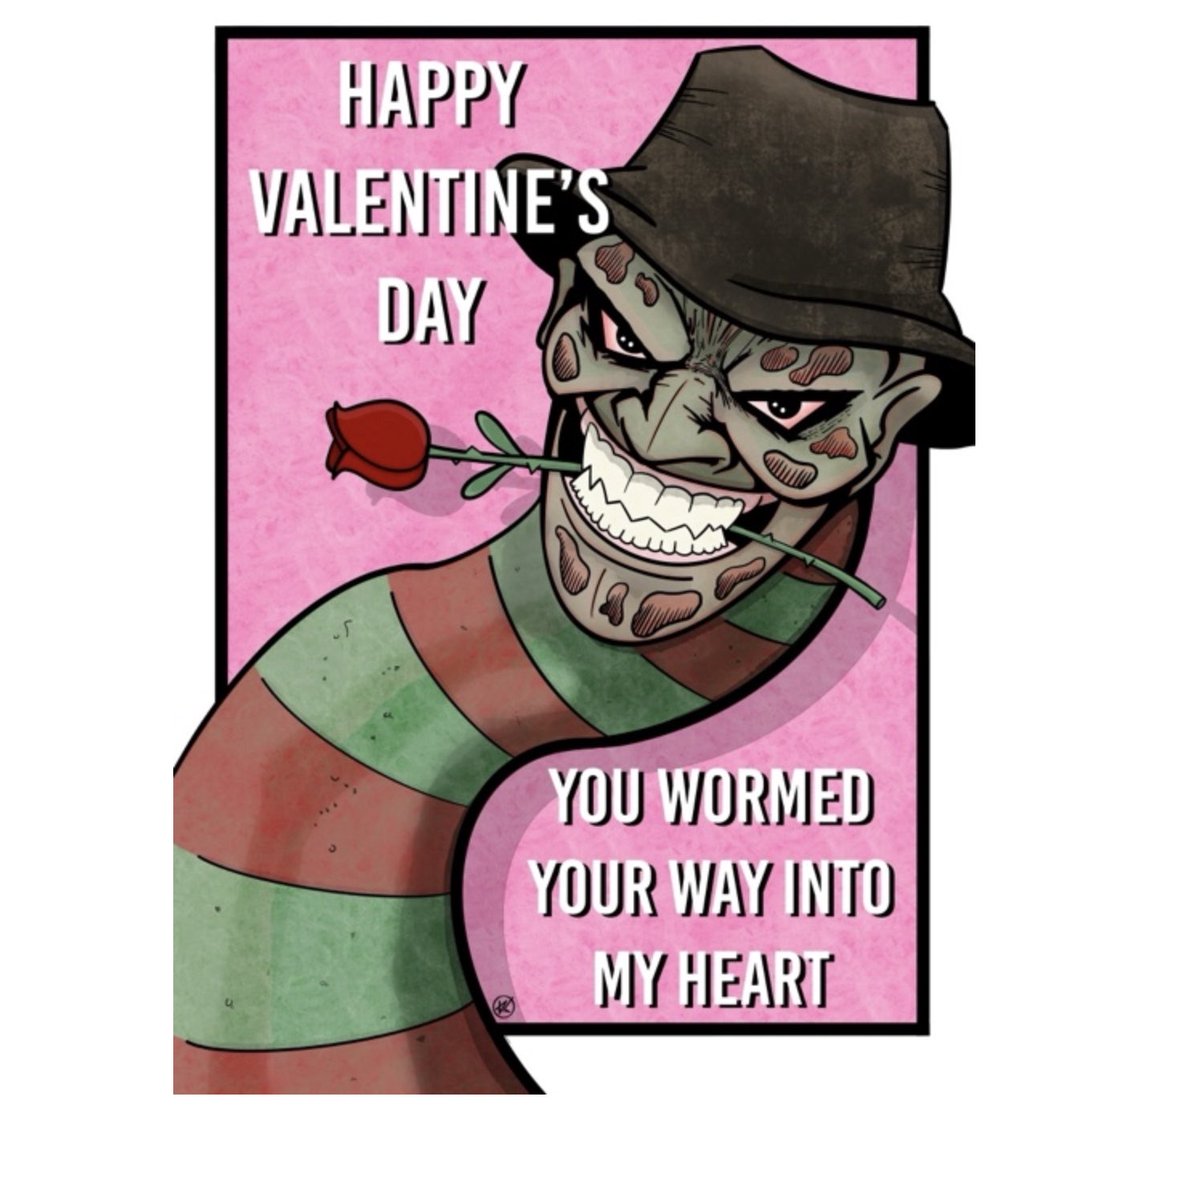 Winner winner chicken dinner! Kris Stockes contributed the winning image for the limited edition Valentine card on RobertEnglund.com. Send your sweetheart a winner! Check out winners from past years while they last.